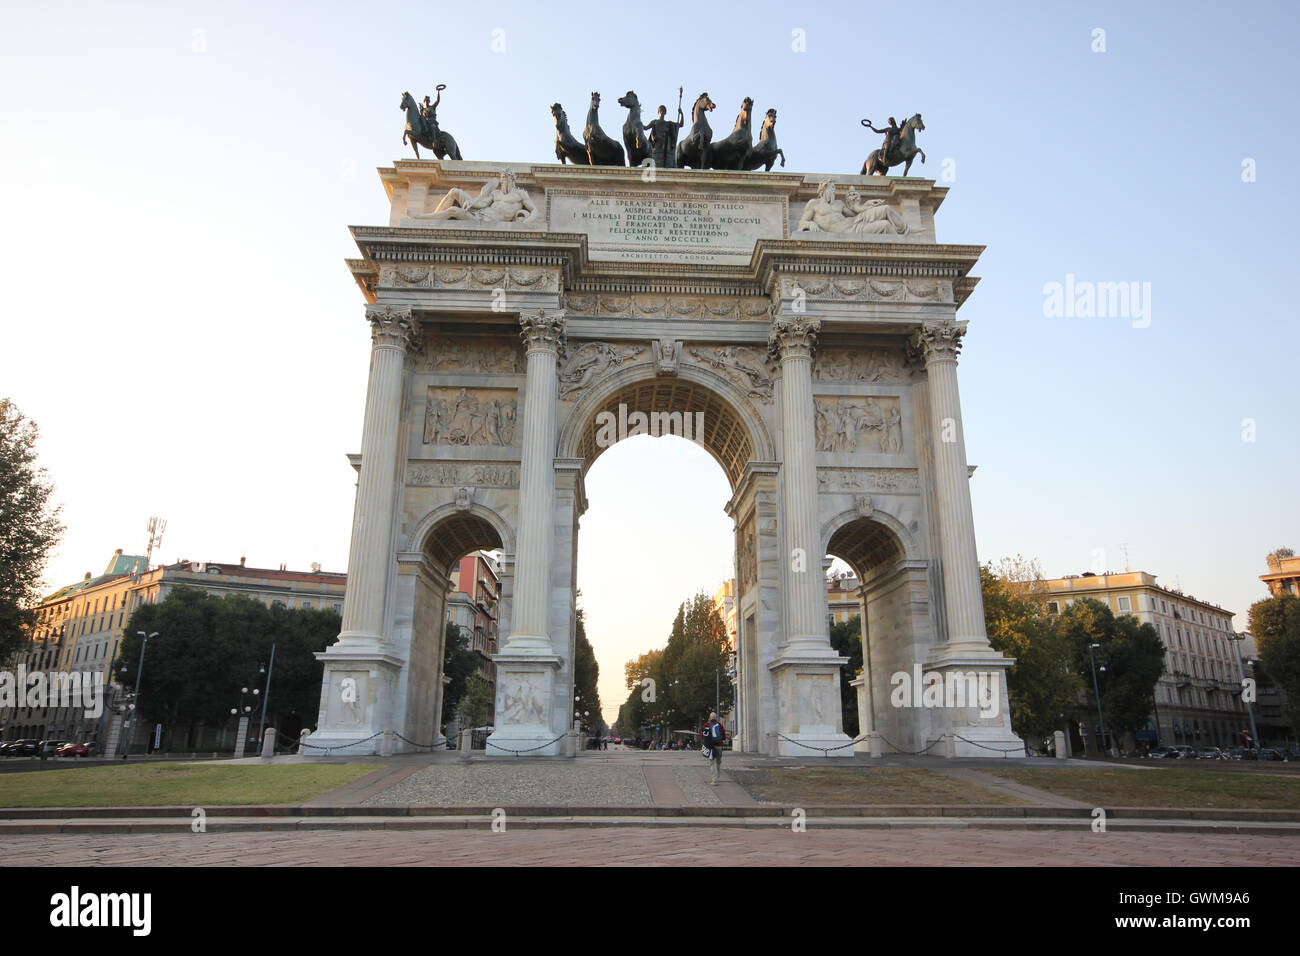 Arco della Pace, Milan, Italy, monuments and historical sites, tourist attraction, tourism Stock Photo